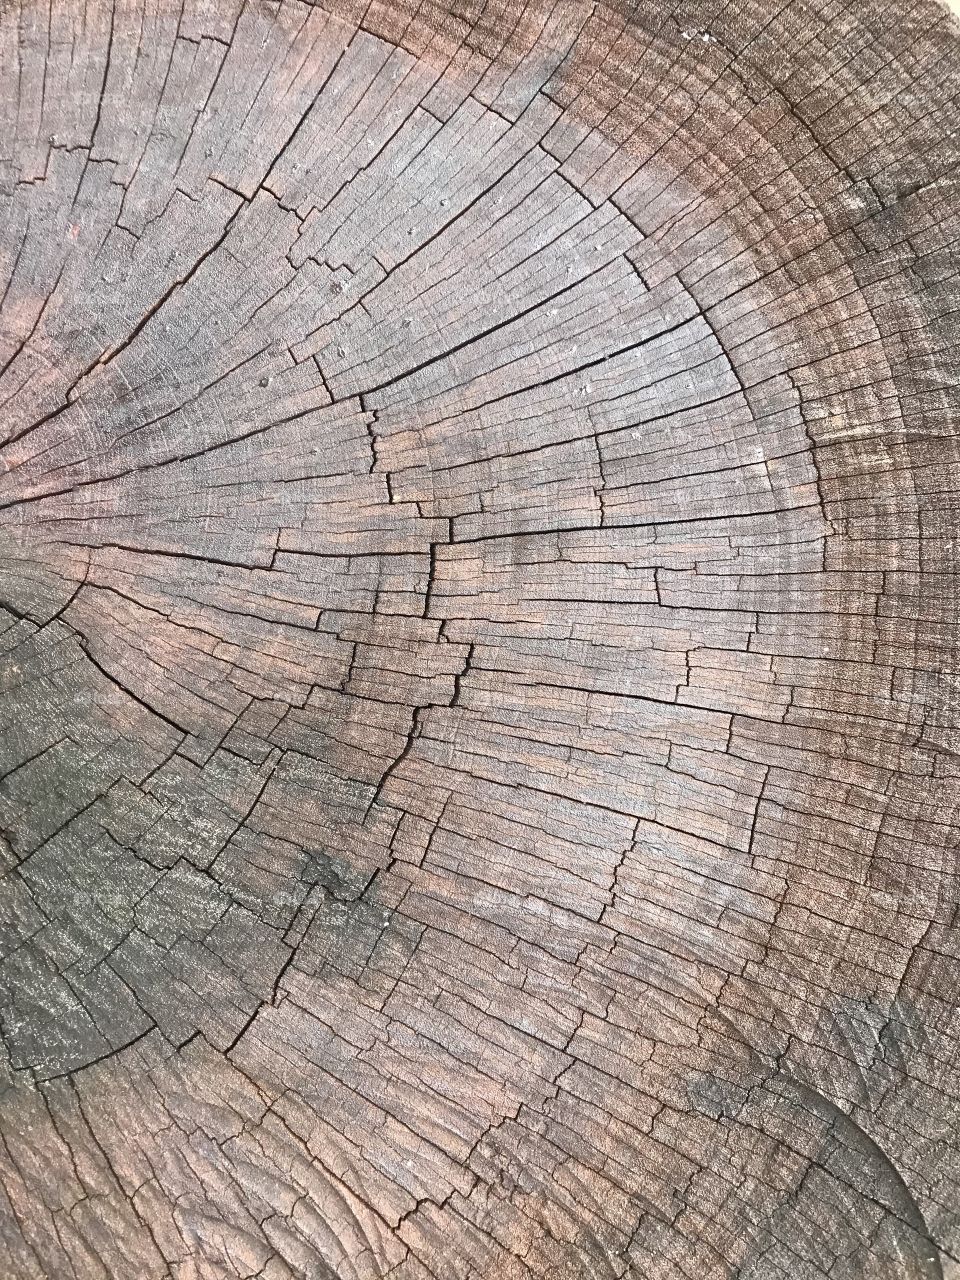 Beautiful texture and pattern of cross section of tree